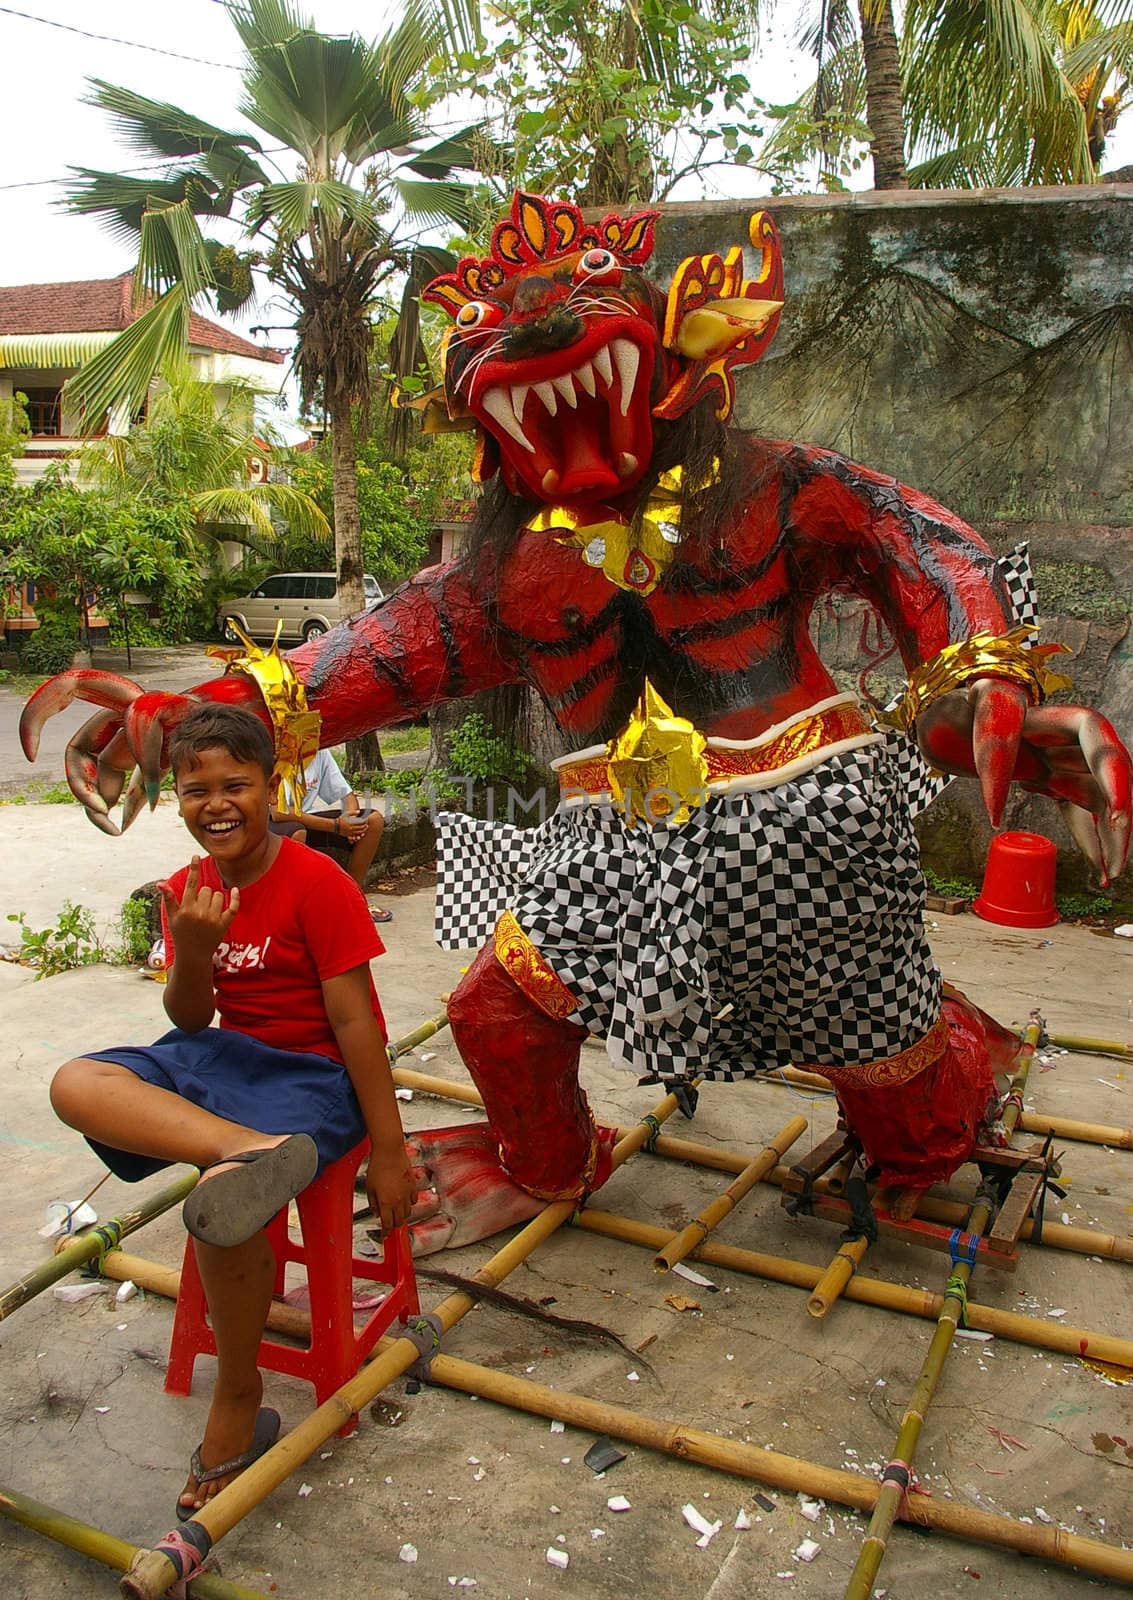 Monster statue for the Balinese Hindu festival of Pengrupukan. This celebrates the Balinese New Year and the arrival of spring. Nusa Dua, Bali, Indonesia